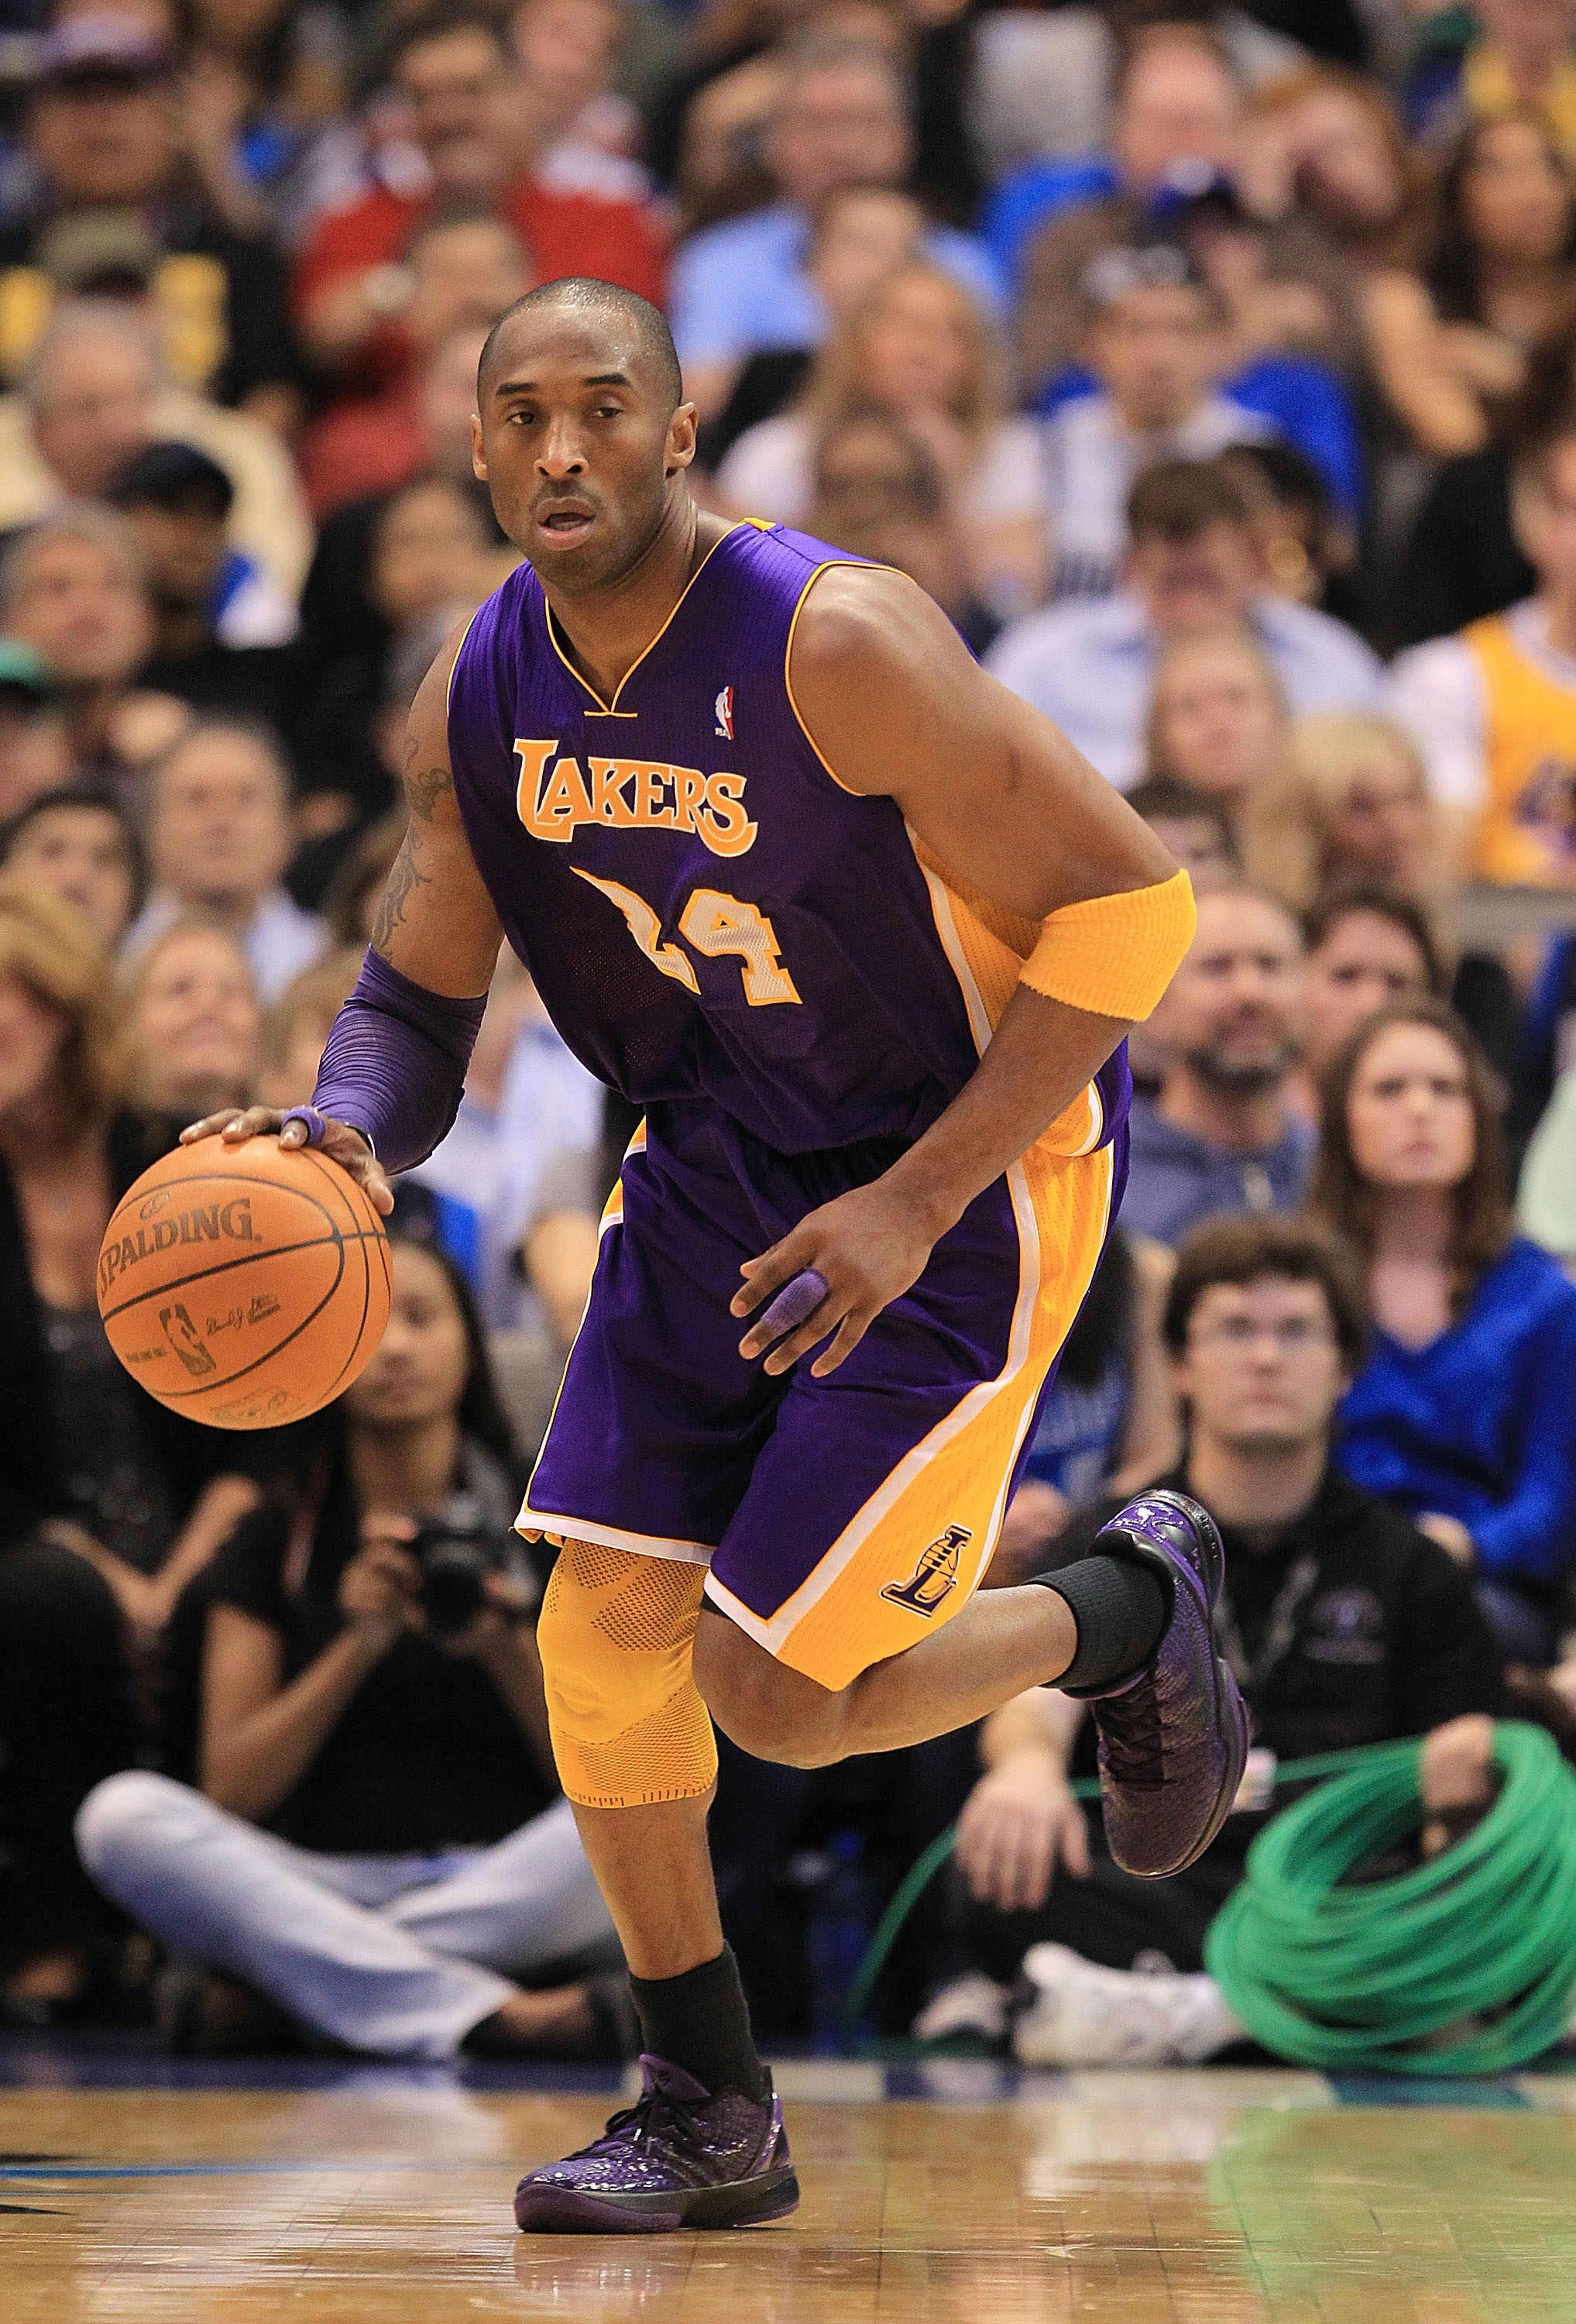 DALLAS, TX - MARCH 12:  Guard Kobe Bryant #24 of the Los Angeles Lakers at American Airlines Center on March 12, 2011 in Dallas, Texas.  NOTE TO USER: User expressly acknowledges and agrees that, by downloading and or using this photograph, User is consen